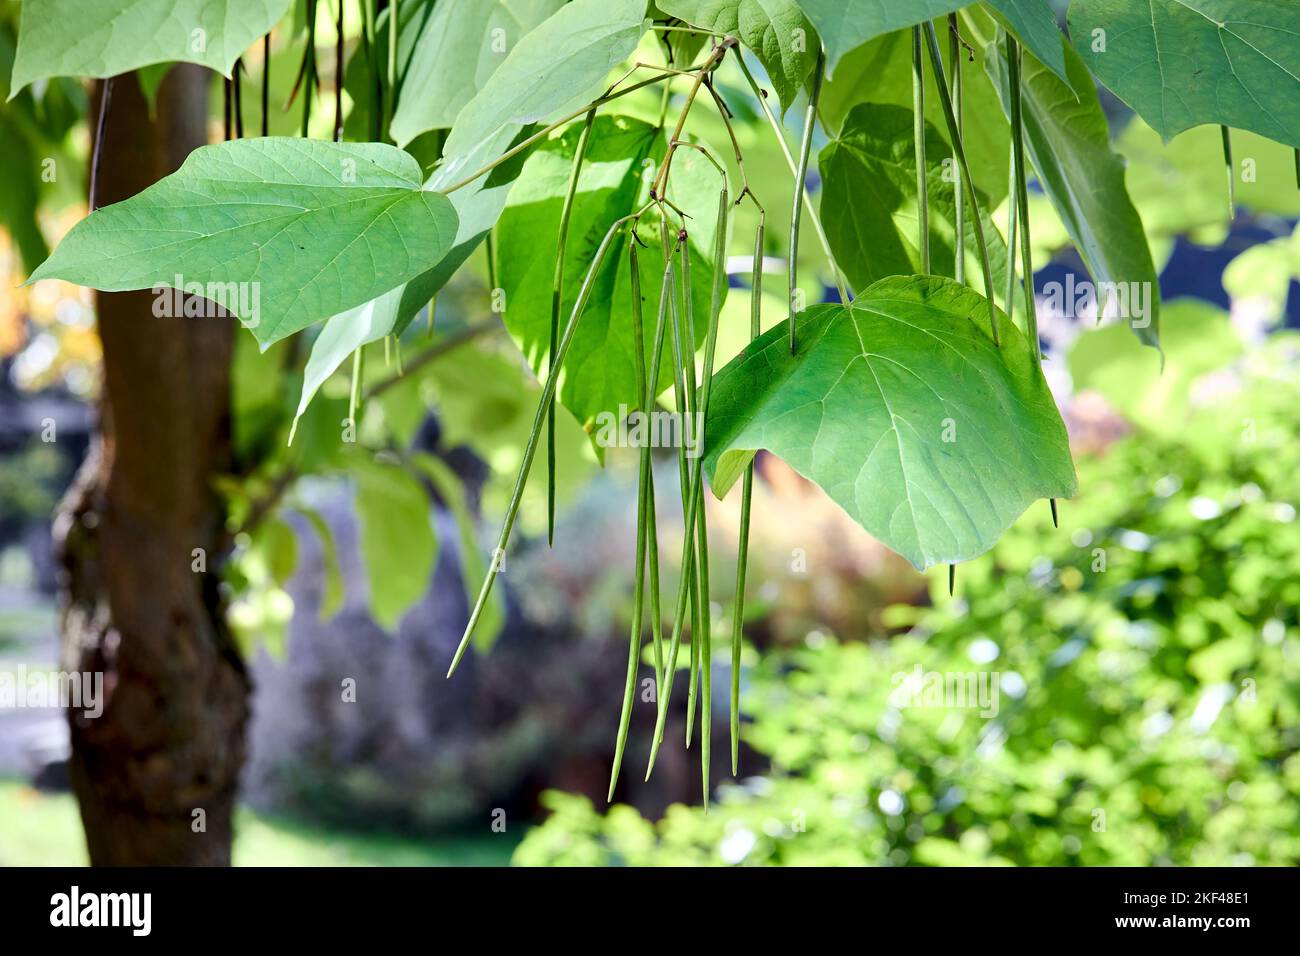 Catalpa bignonioides or southern catalpa, cigar tree, and Indian-bean-tree commonly used as garden and street tree. Branches with foliage closeup Stock Photo